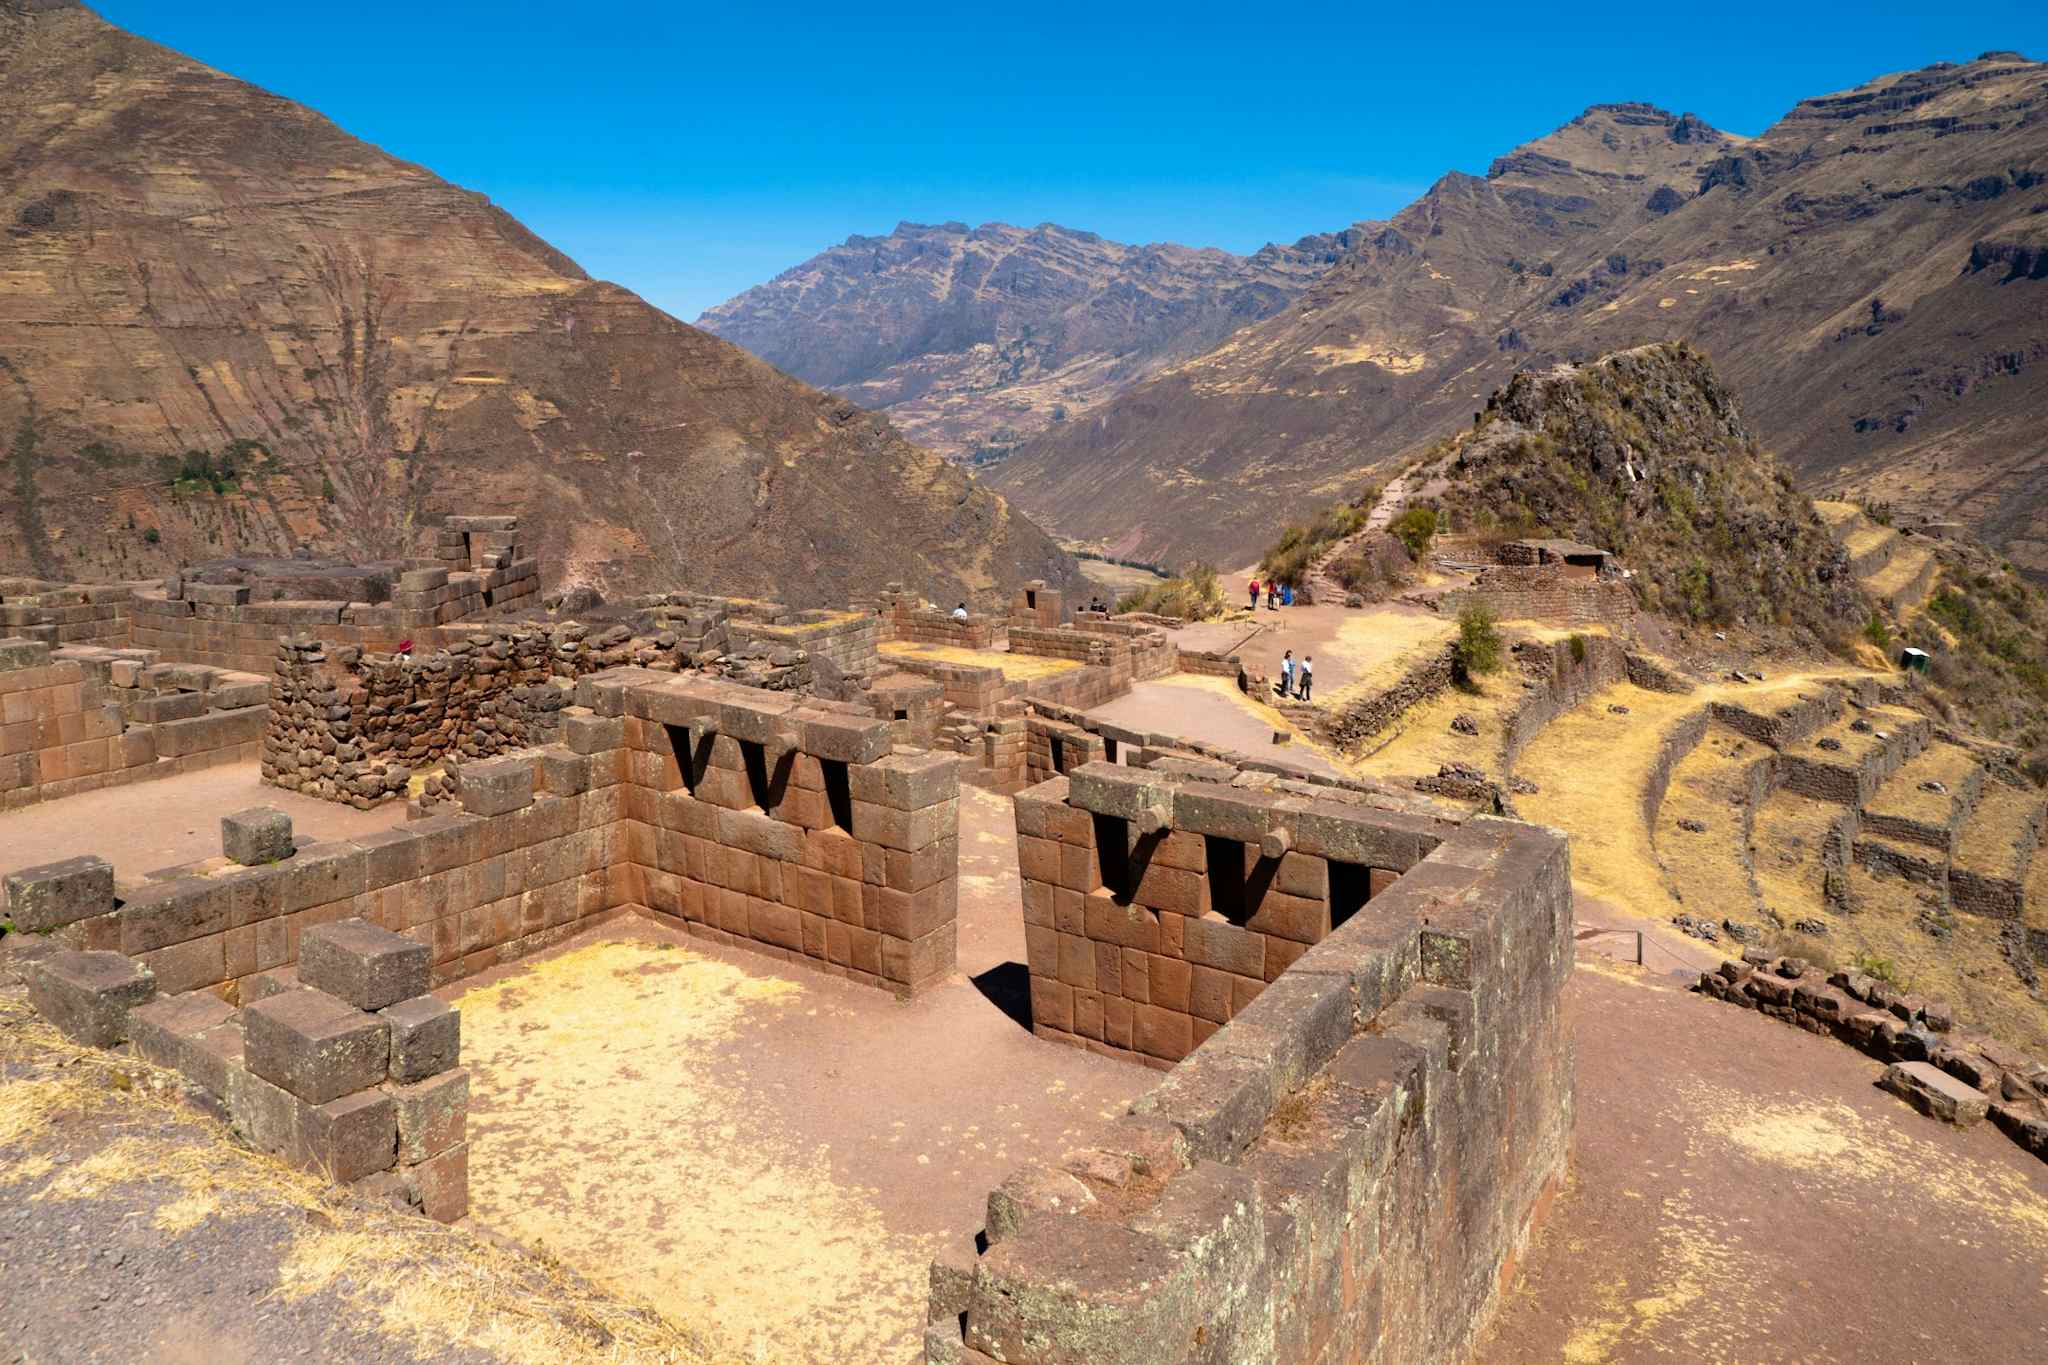 Pisac ruins in the Sacred Valley, Peru. Photo: Canva link:https://www.canva.com/photos/MAED8BbuNqY-pisac-ruins-sacred-valley-peru/